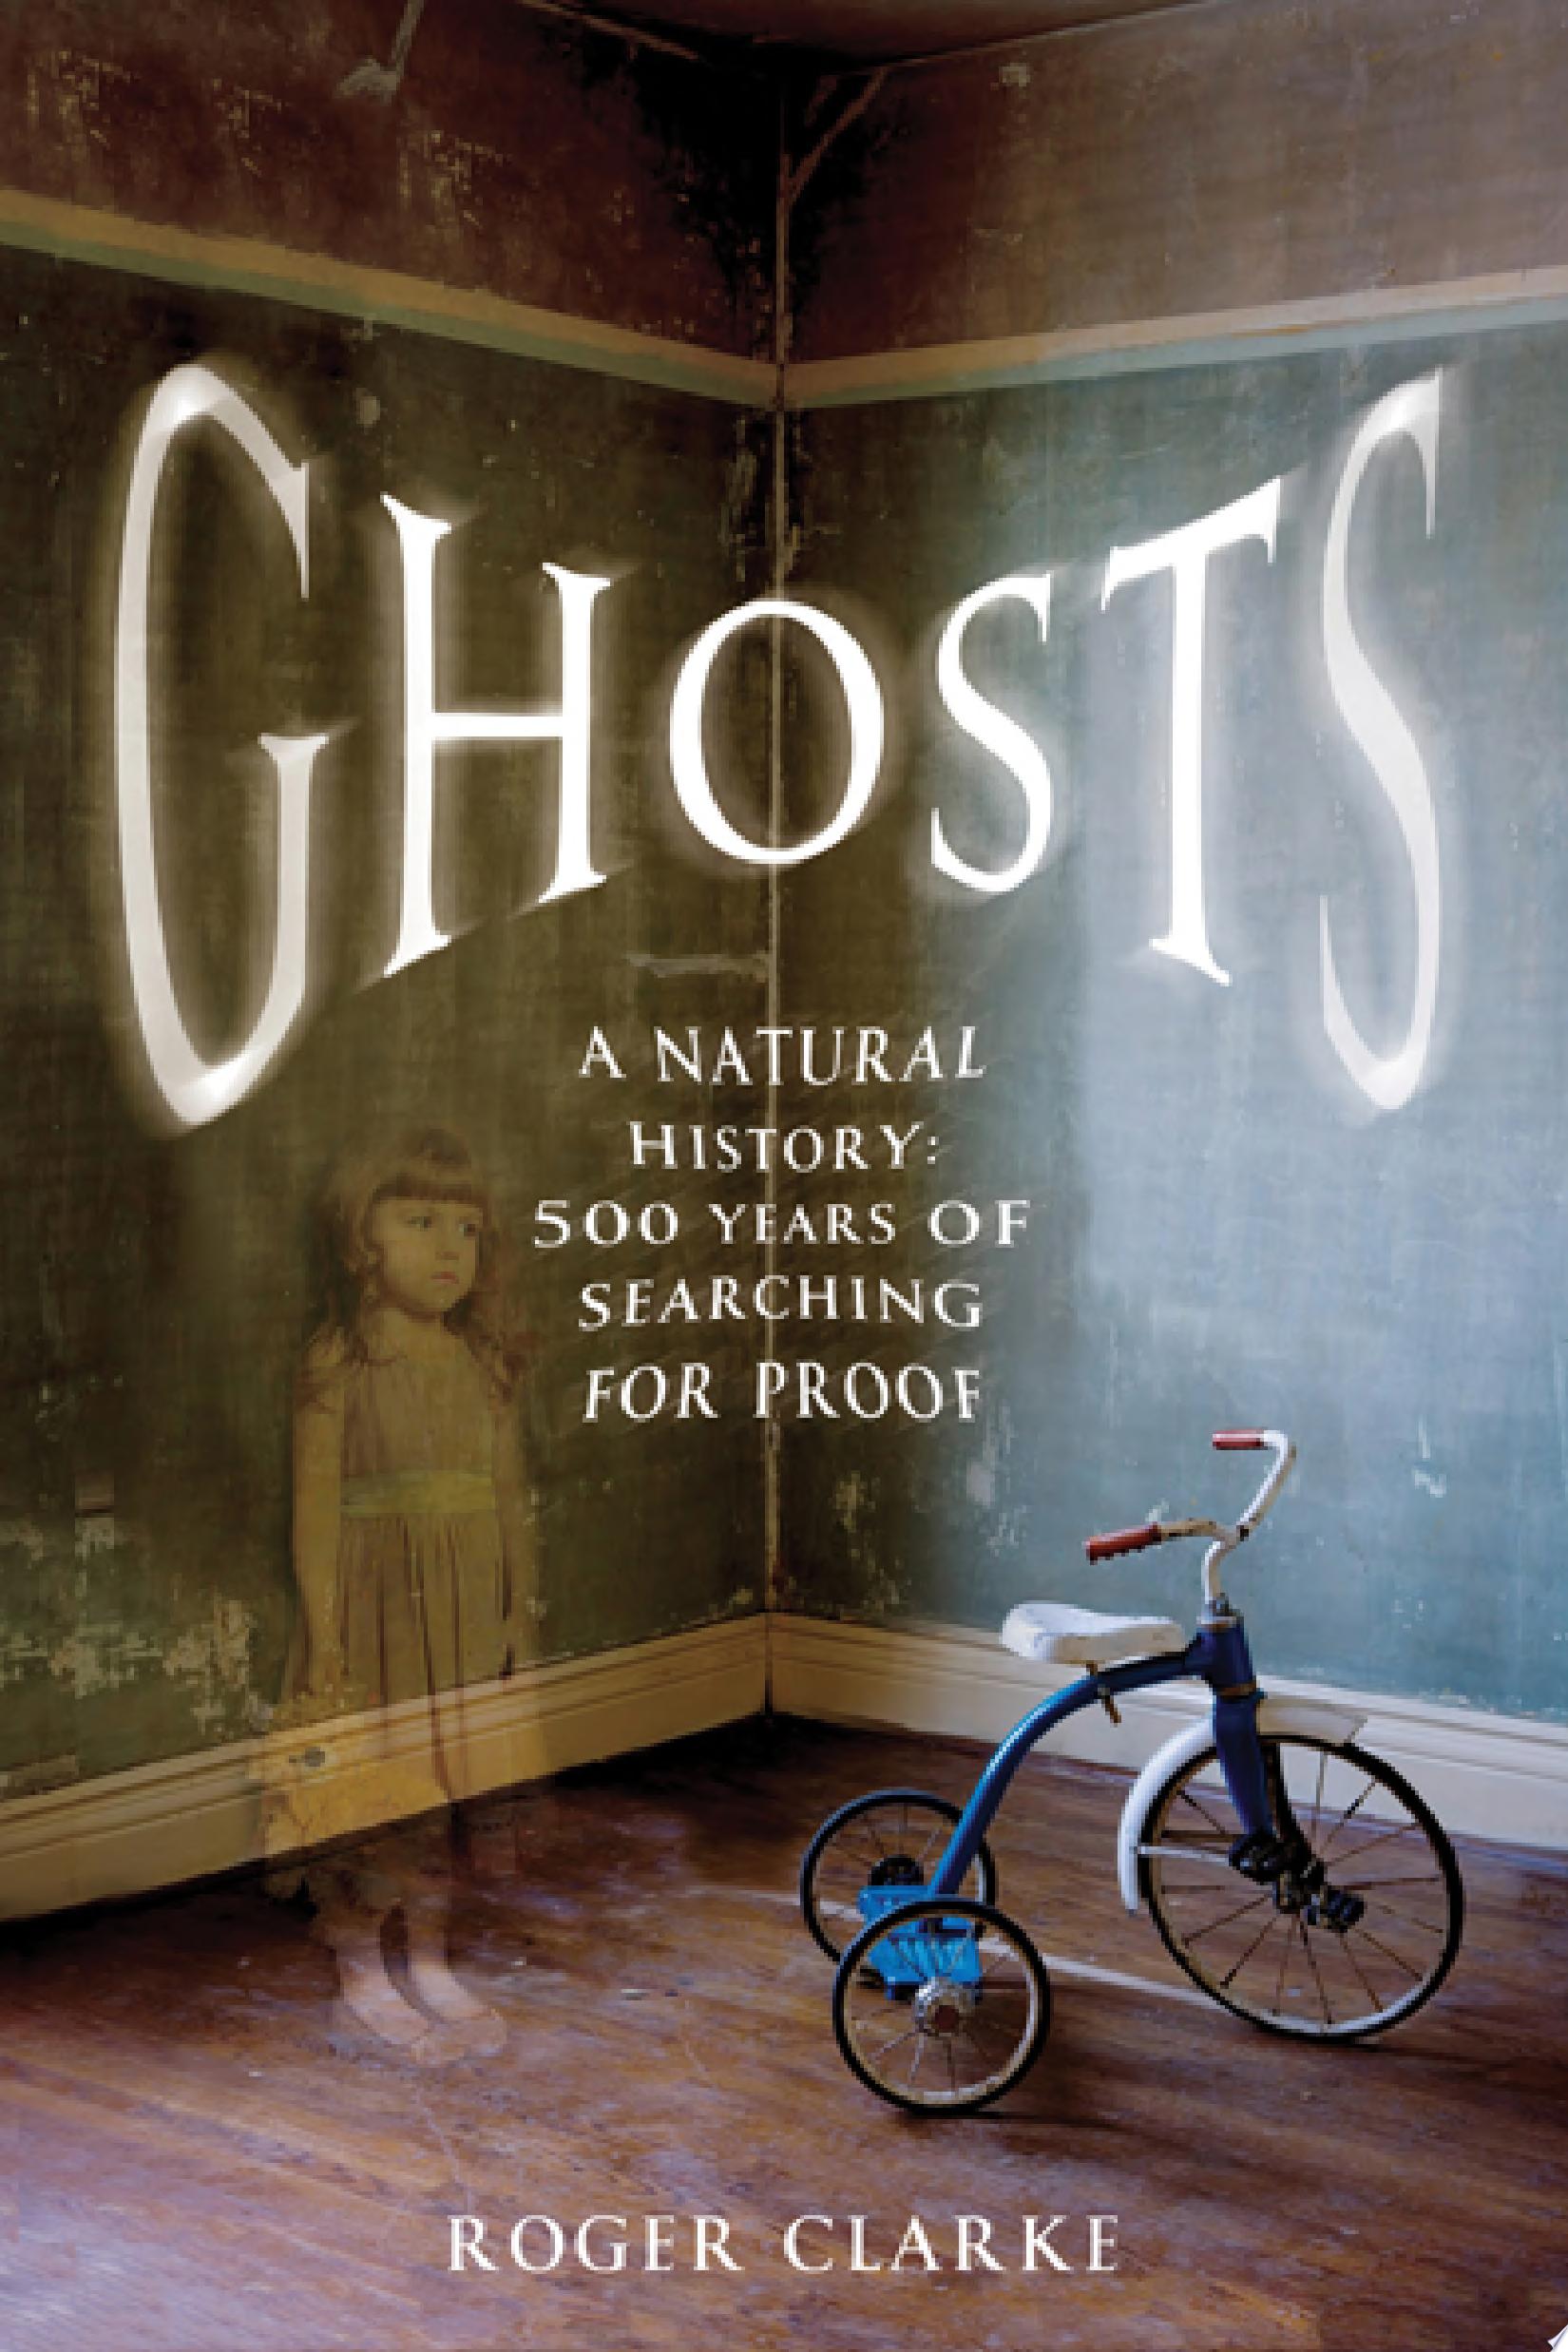 Image for "Ghosts"